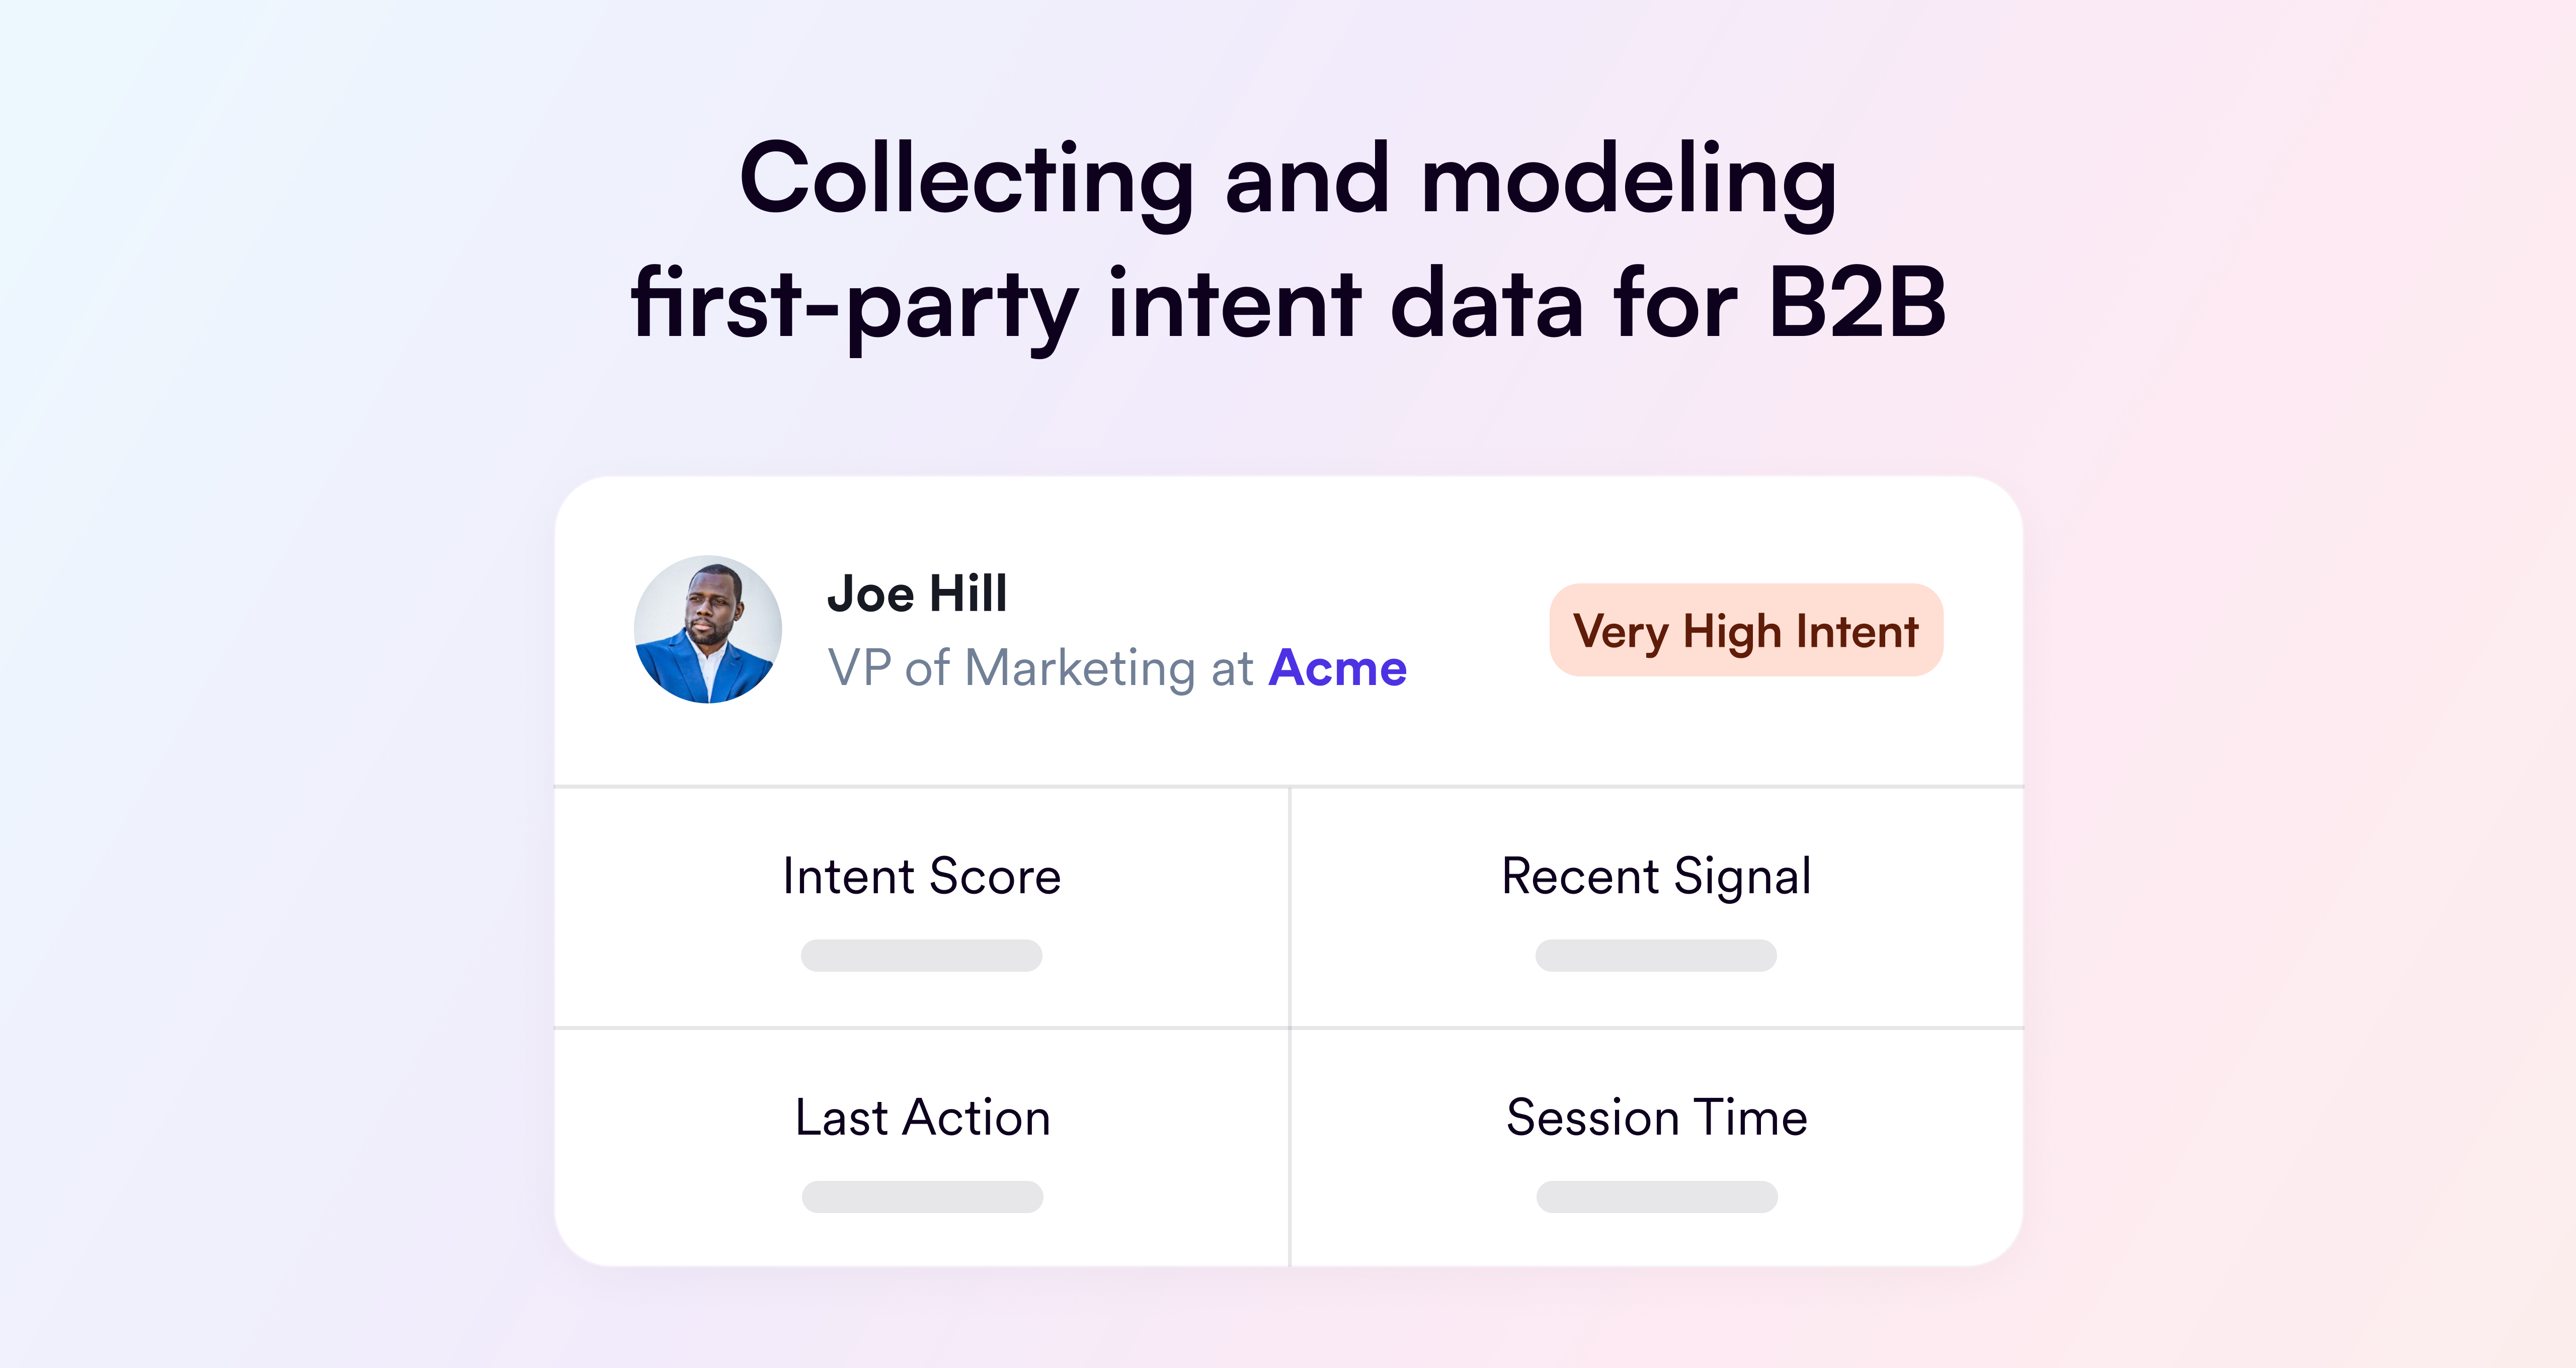 Part 2: Collecting and modeling first-party intent data for B2B